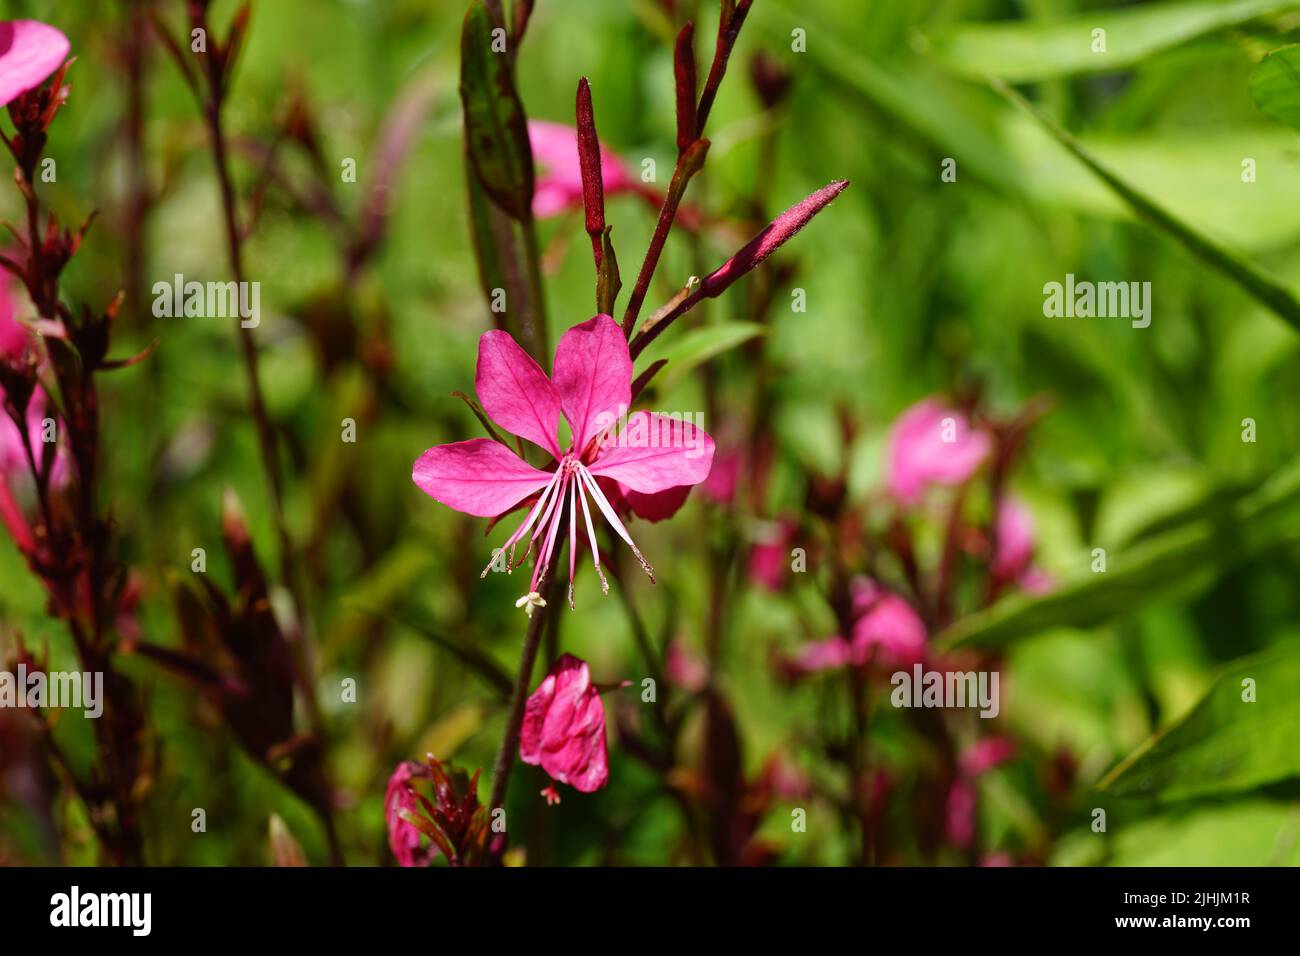 Closeup Wand Flower (Gaura lindheimeri gaudi red ), willowherb family (Onagraceae). July, in a Dutch garden. Blurred plants on the background. Stock Photo